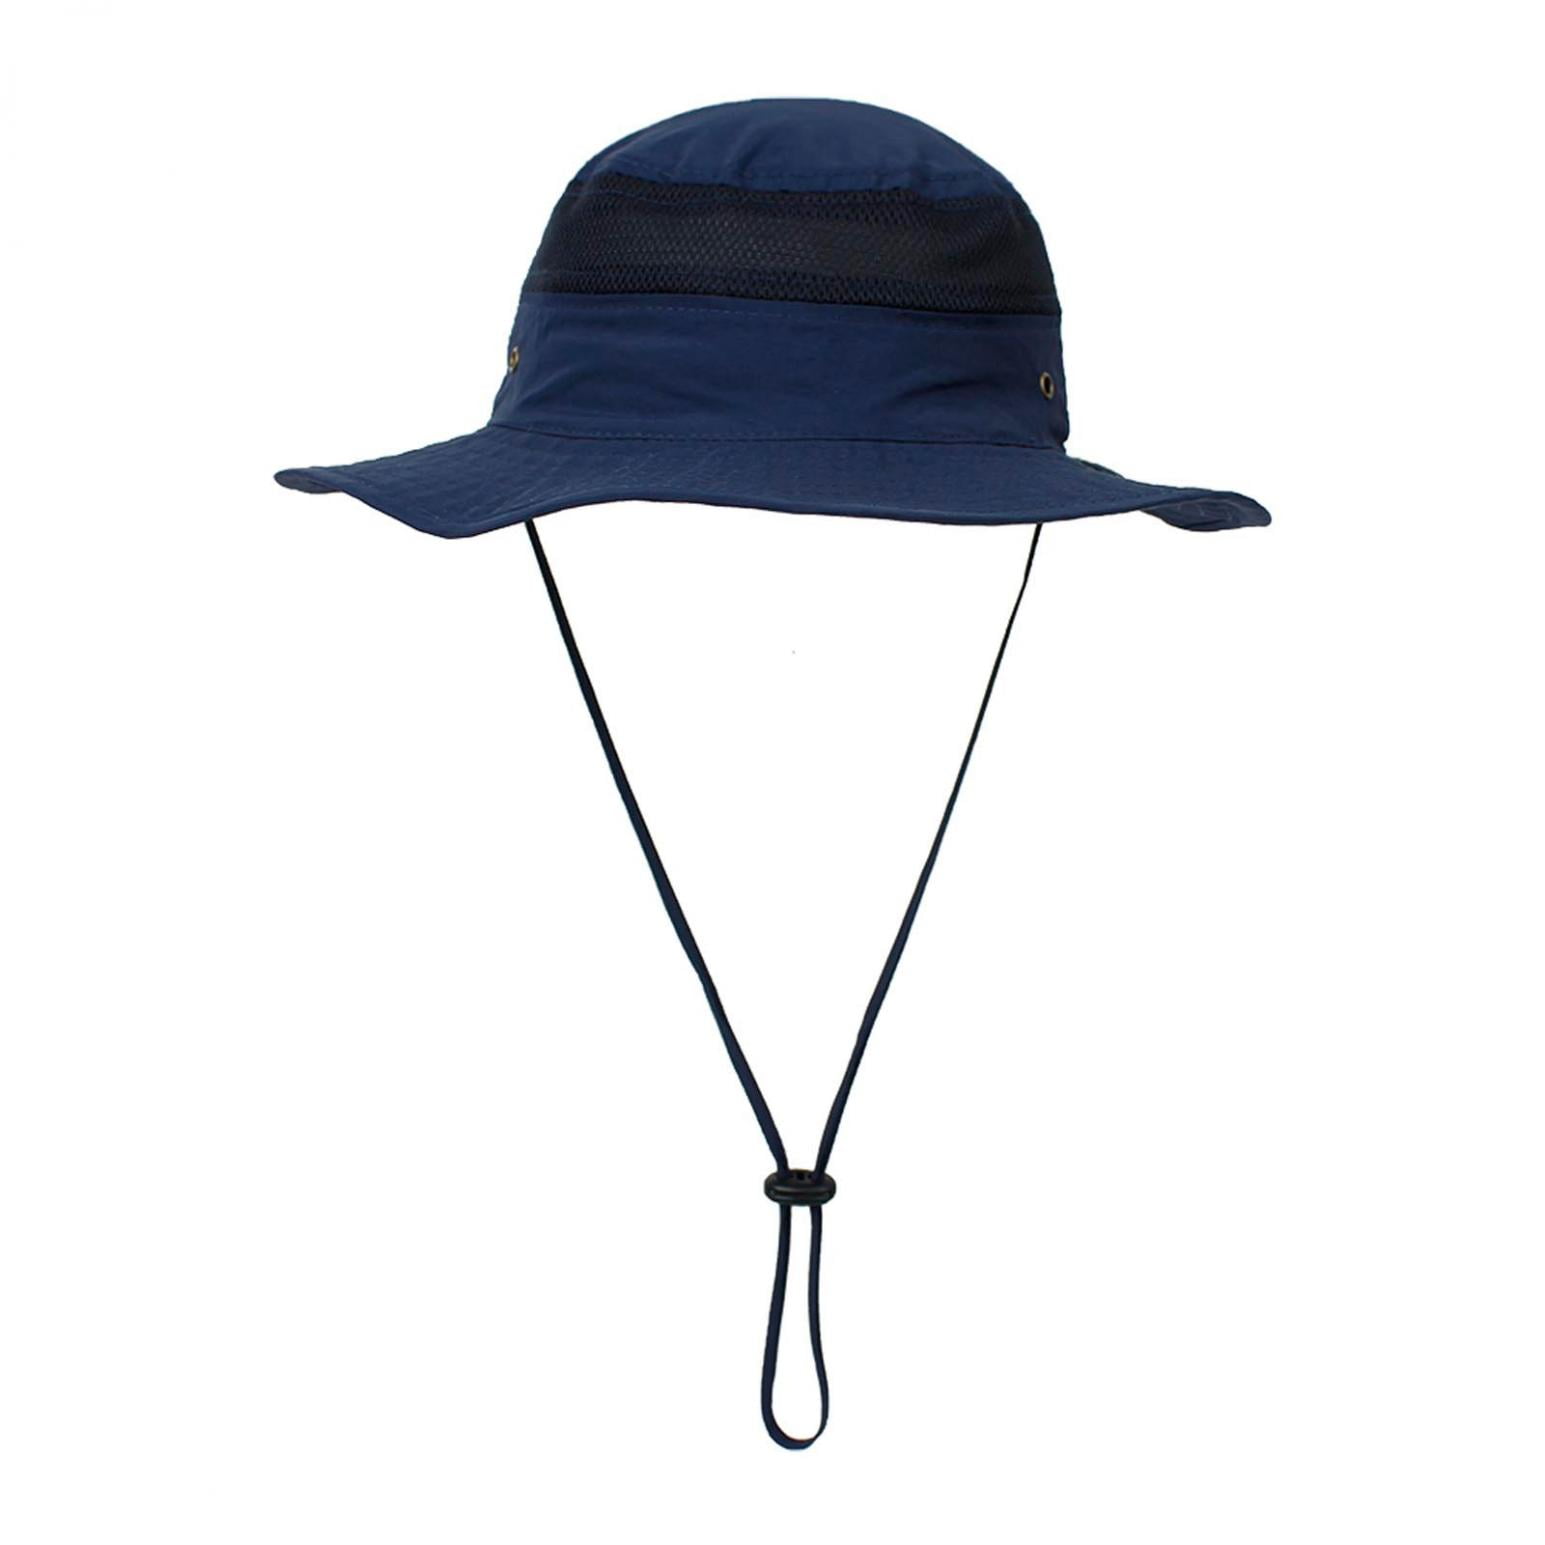 XZNGL Fishing Bucket Hats for Kids,Beach Bucket Hats for Toddler